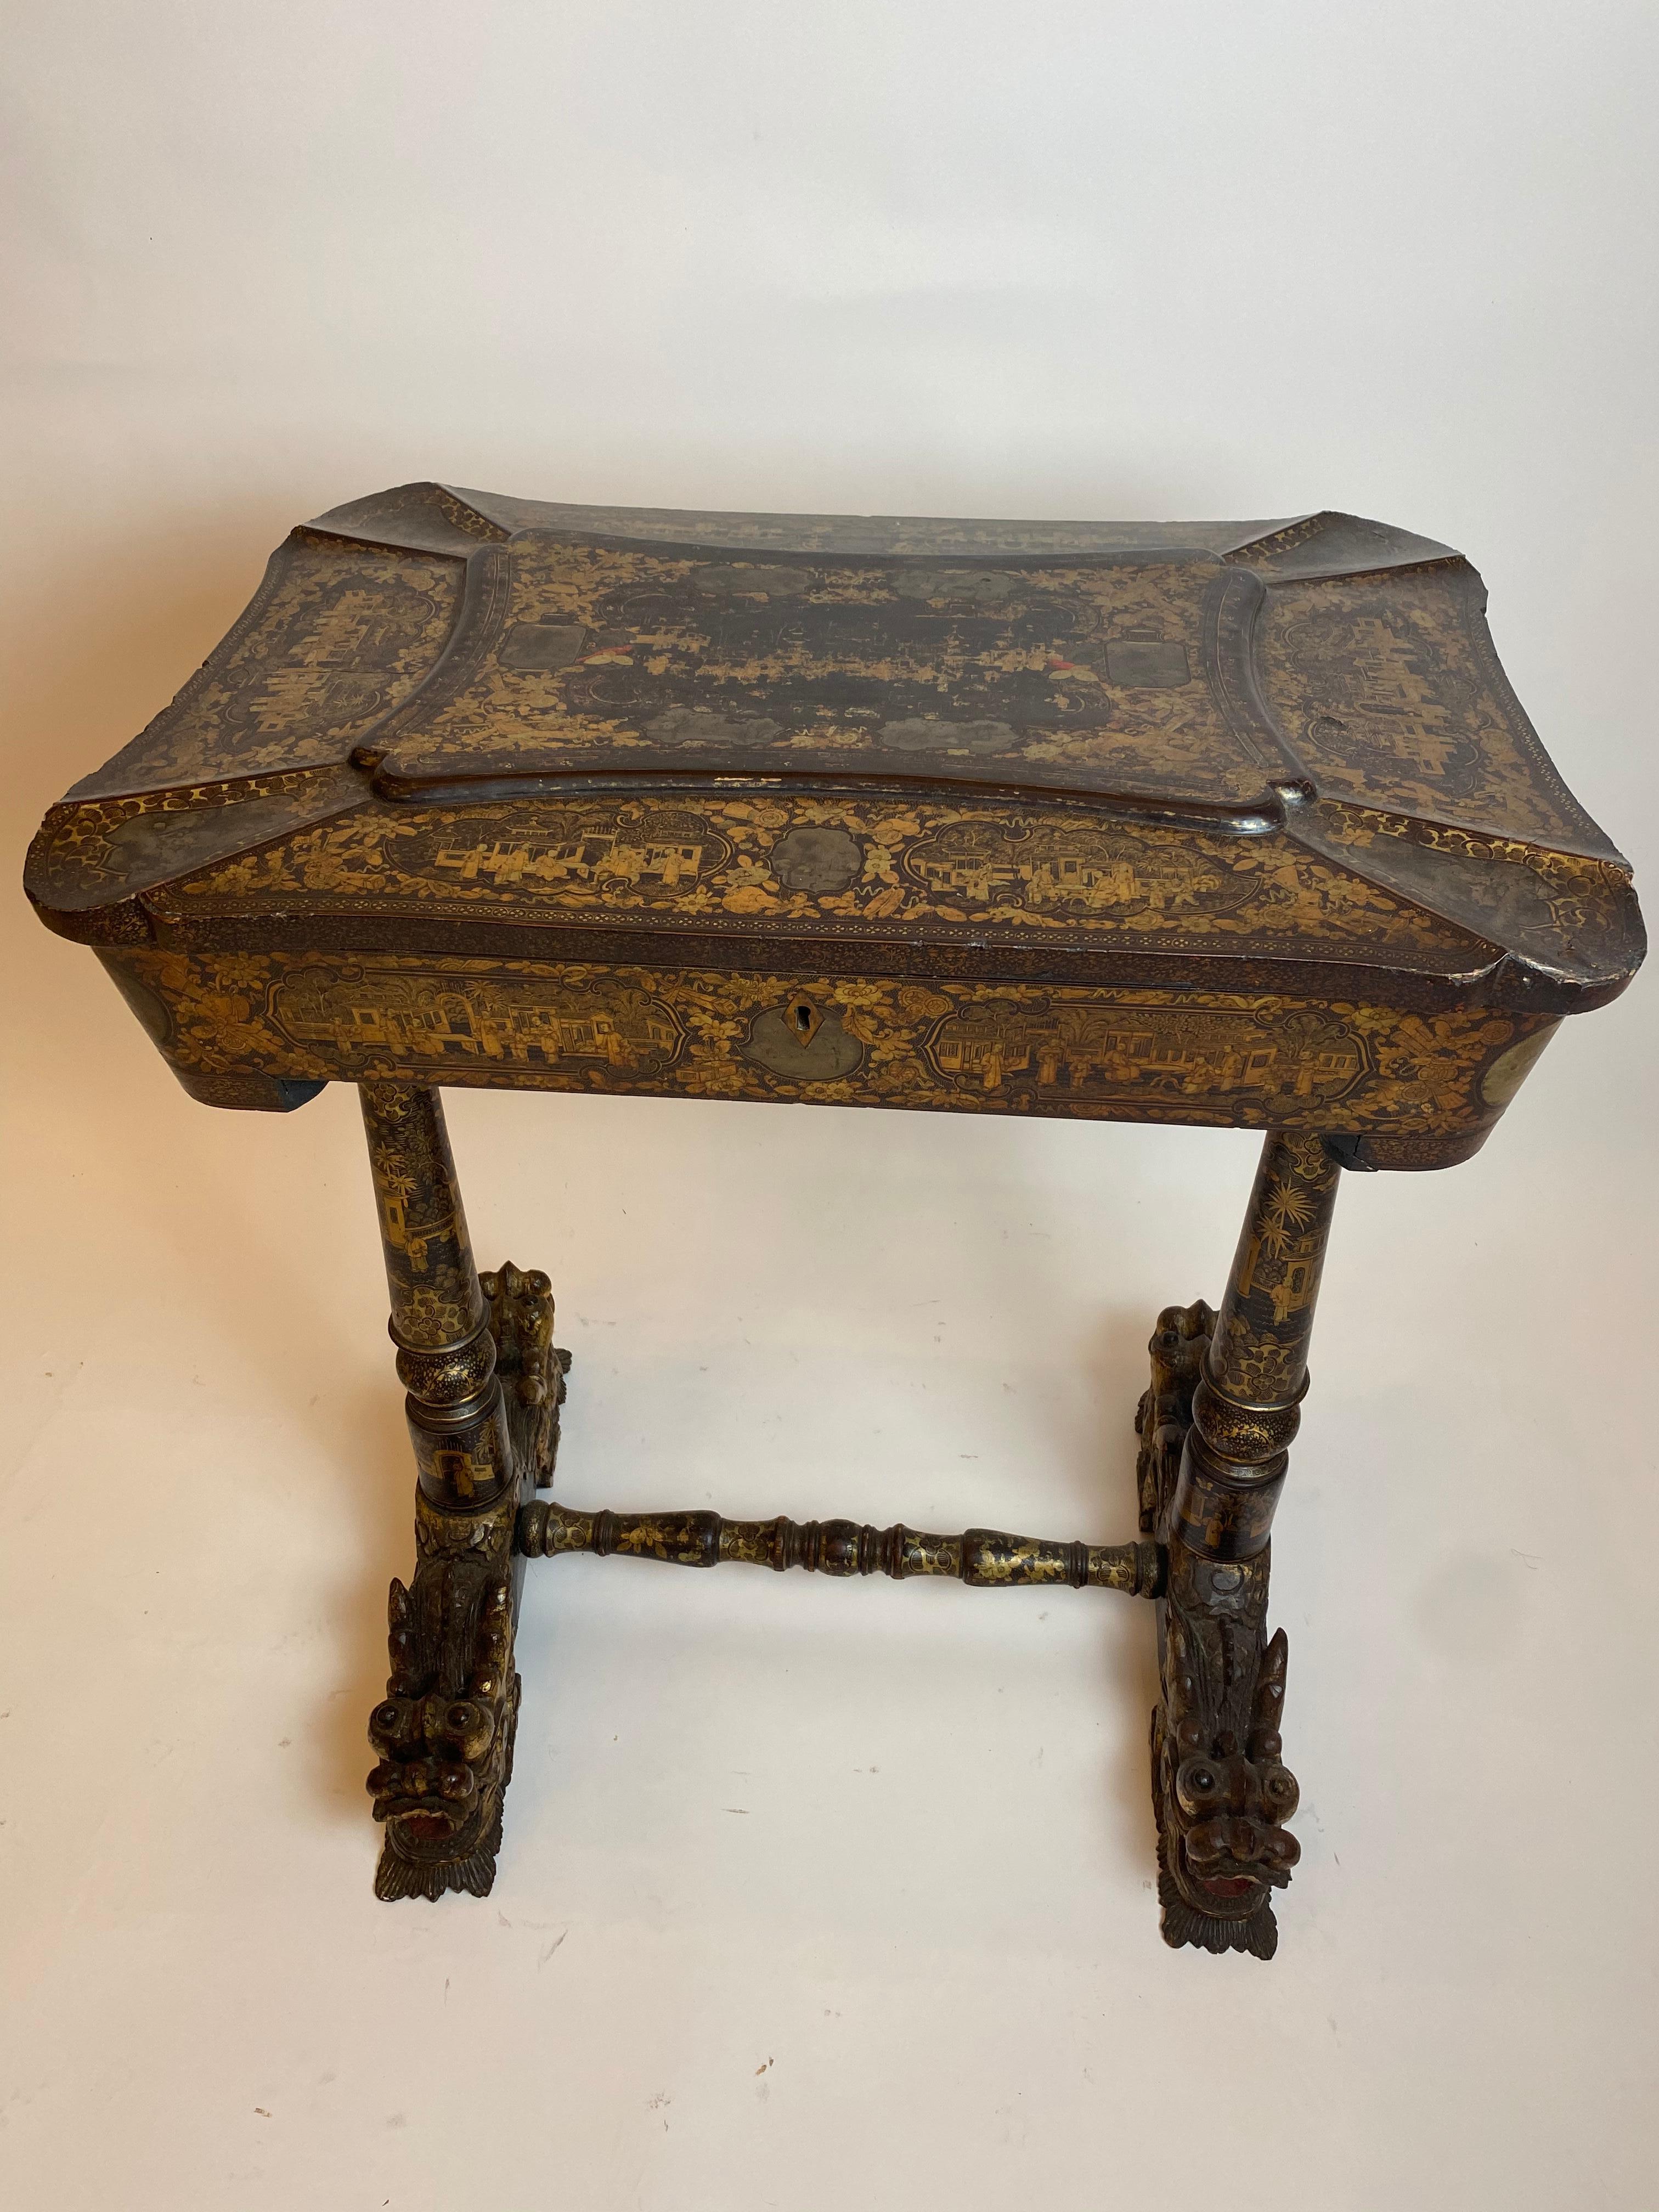 Early 19th Century Chinese Export Lacquer and Gilt Work Table For Sale 1